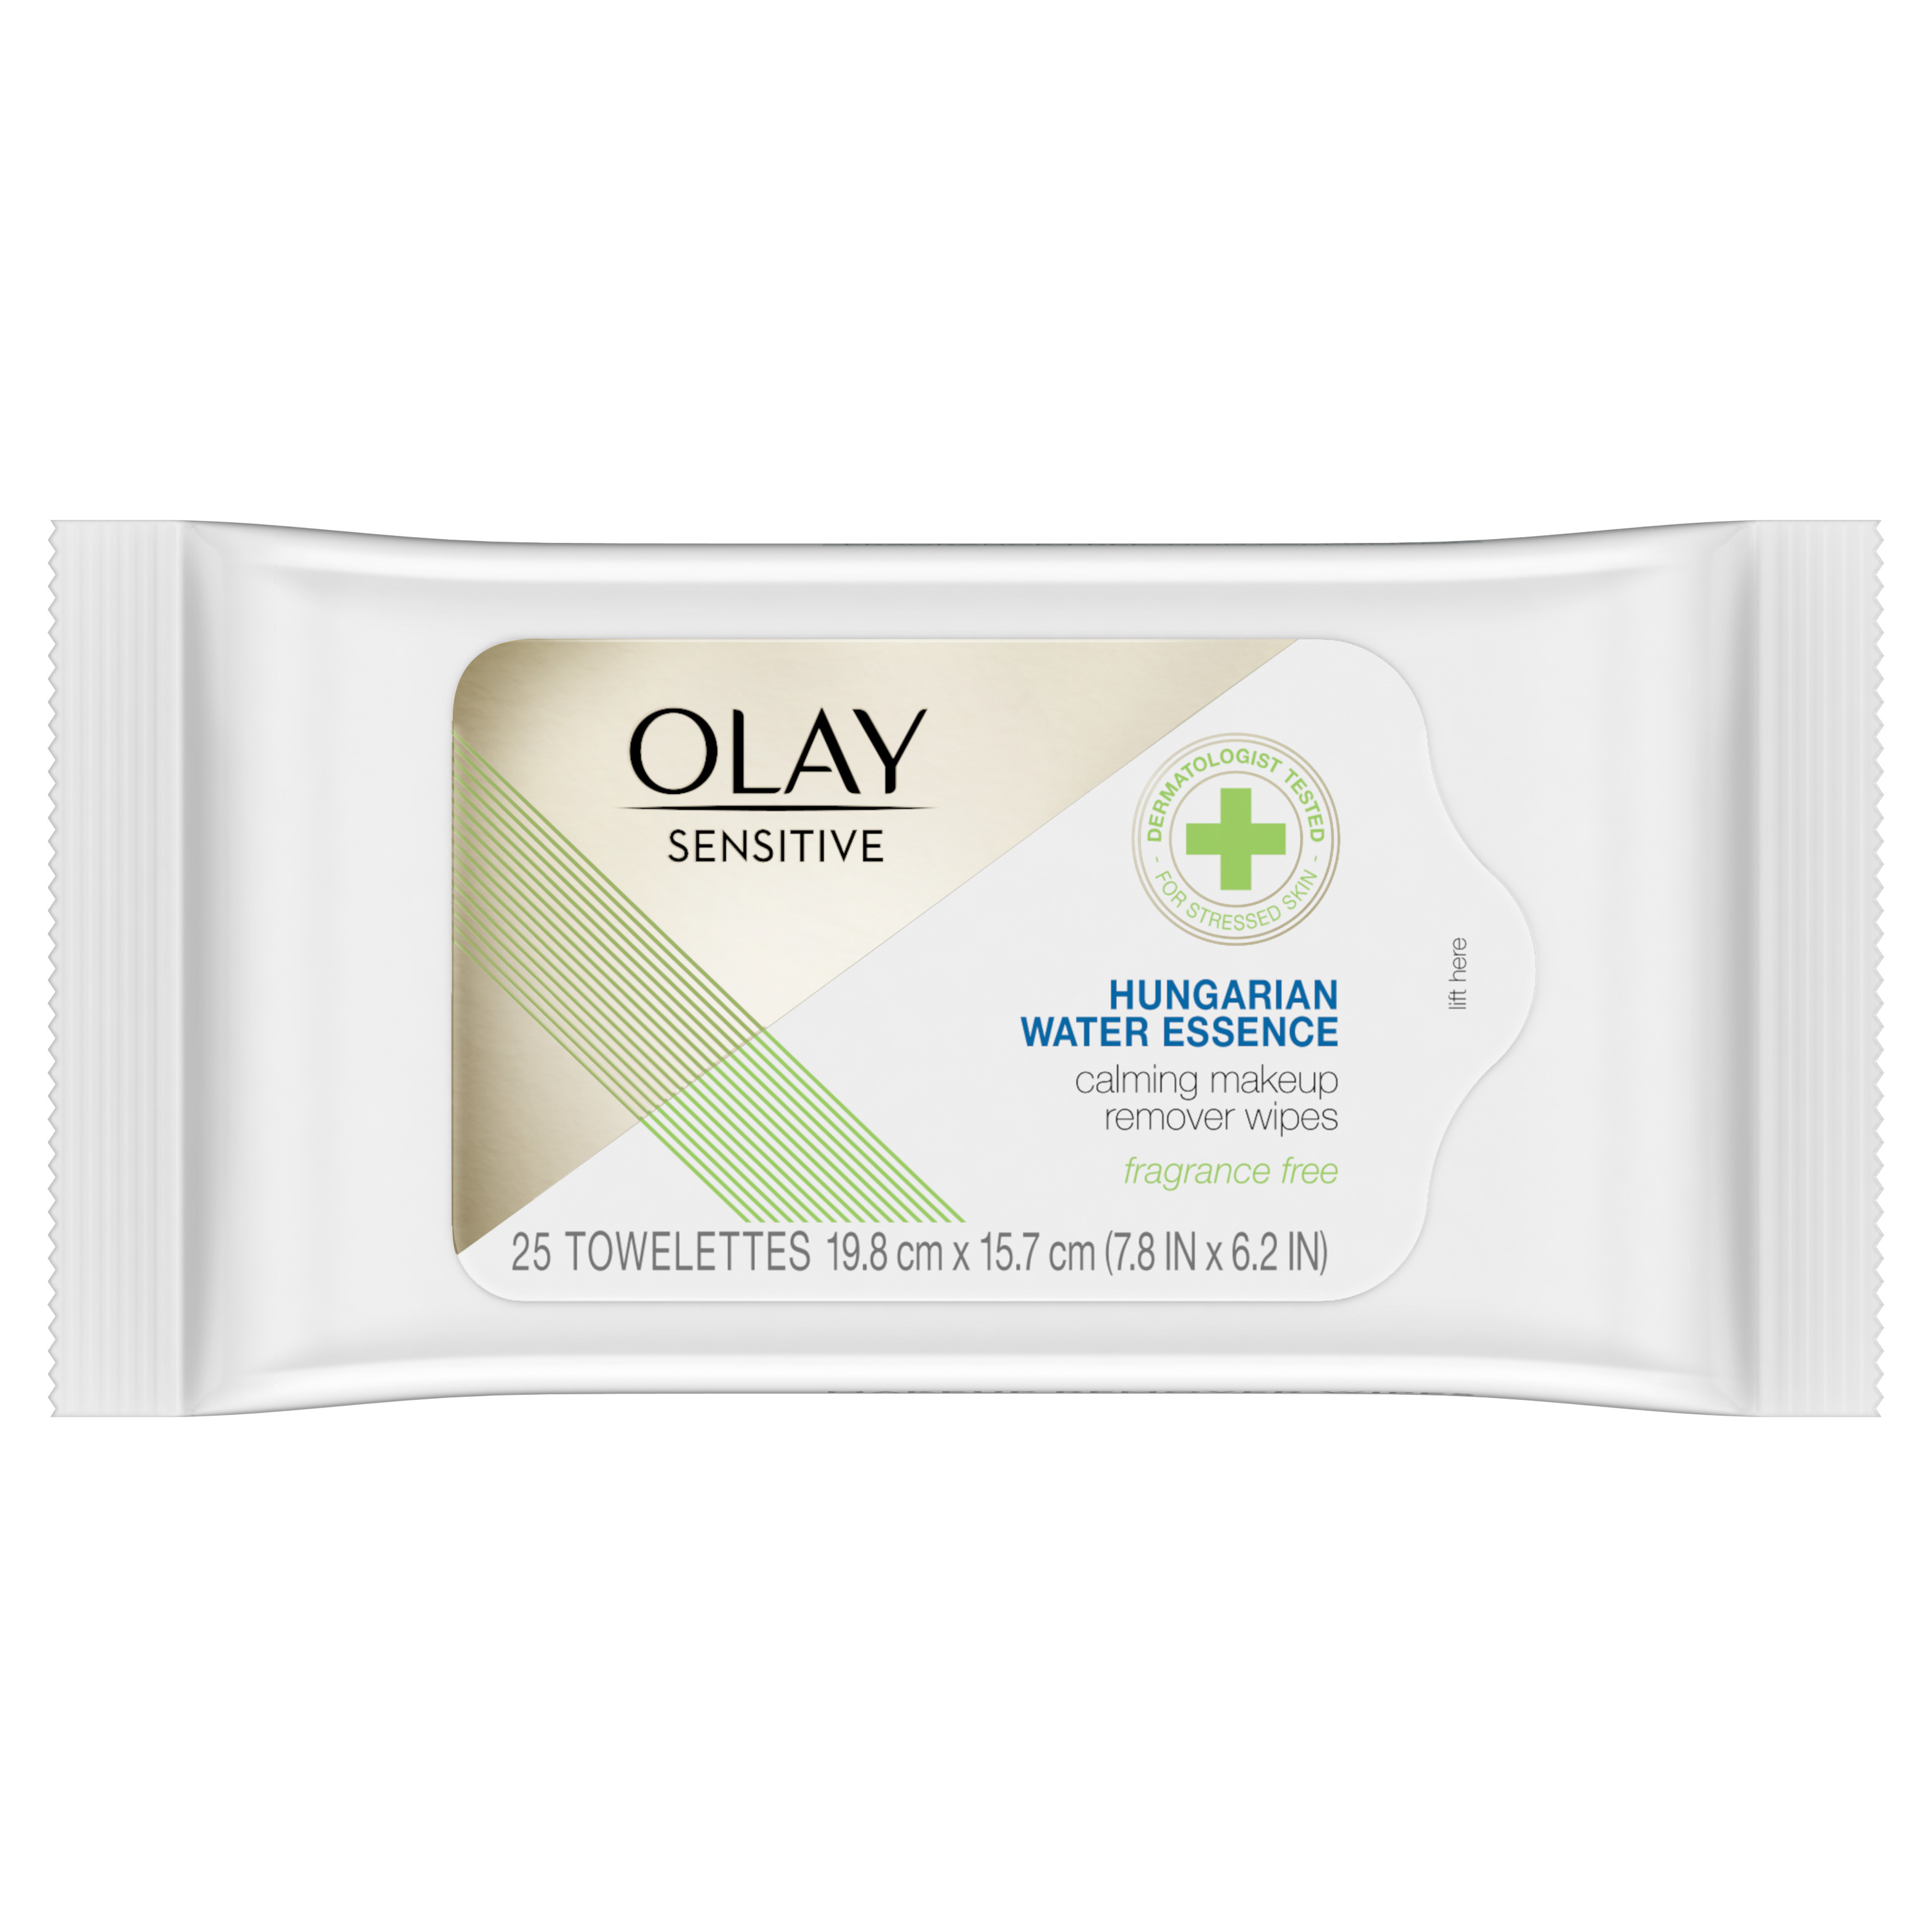 Olay Sensitive Makeup Remover Wipes with Hungarian Water Essence, 25 ct - image 1 of 7